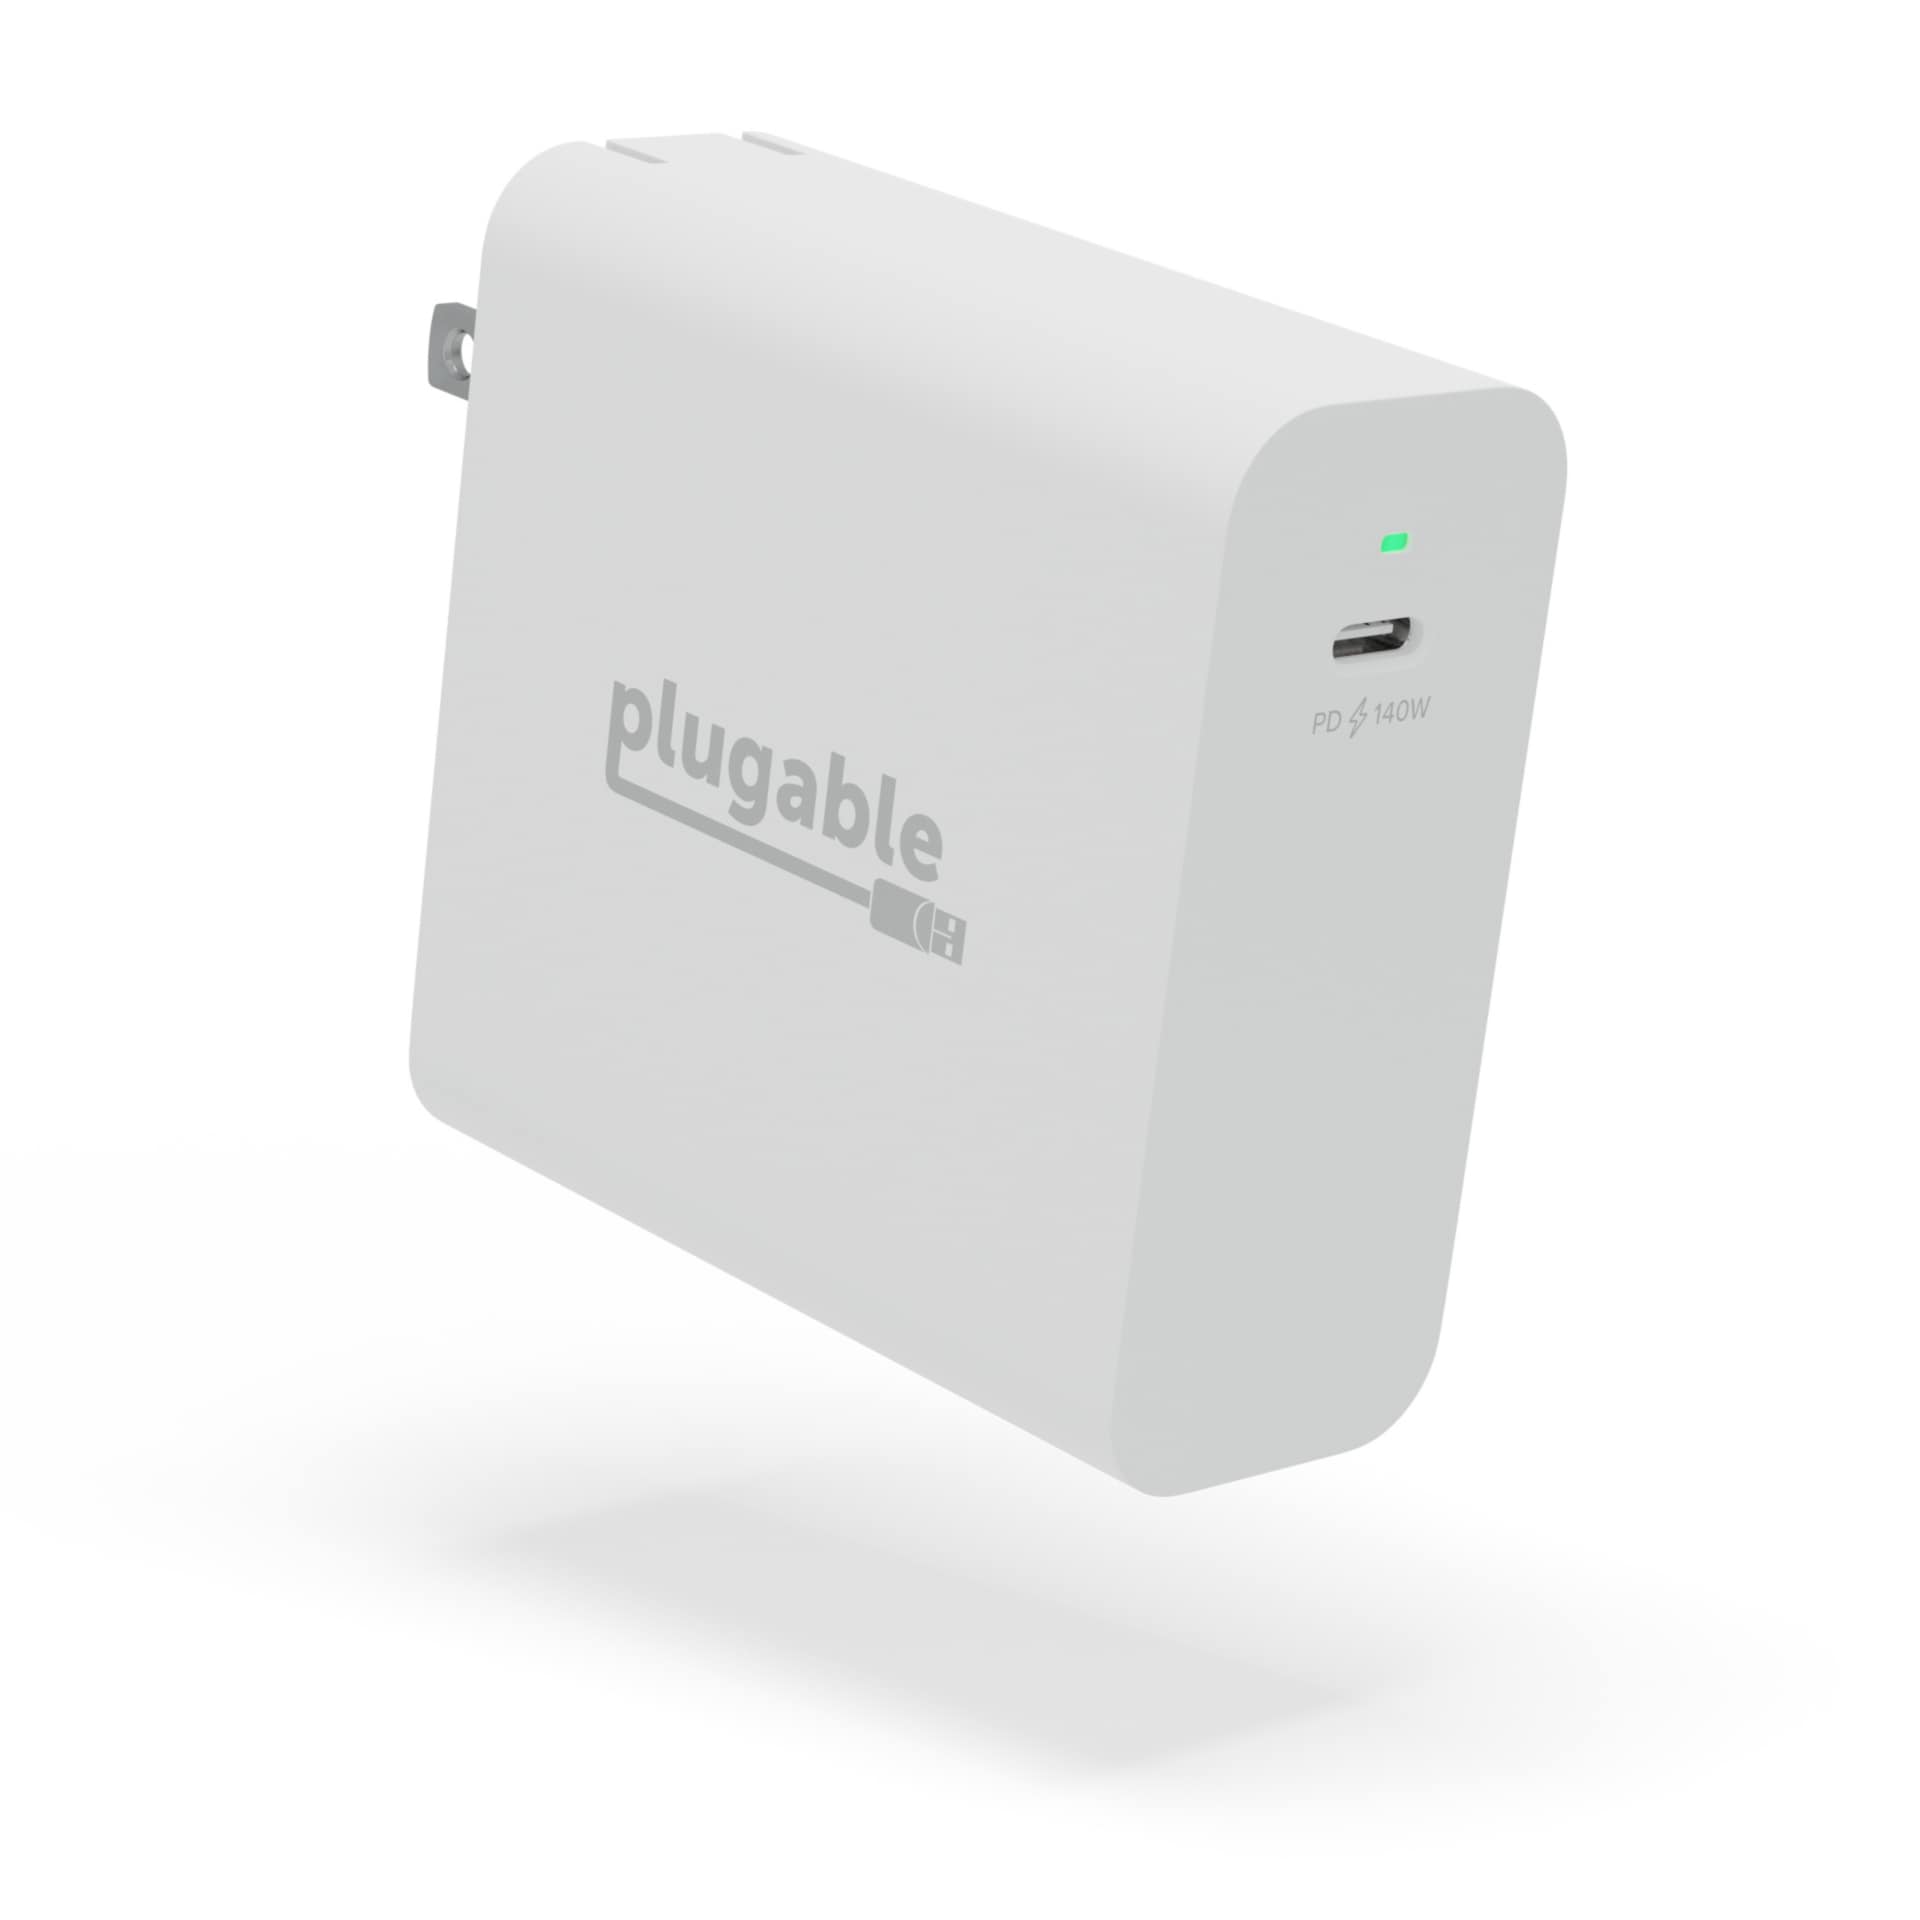 Plugable 140W USB-C GaN Charger PD 3.1 EPR Power Adapter for USB-C Devices